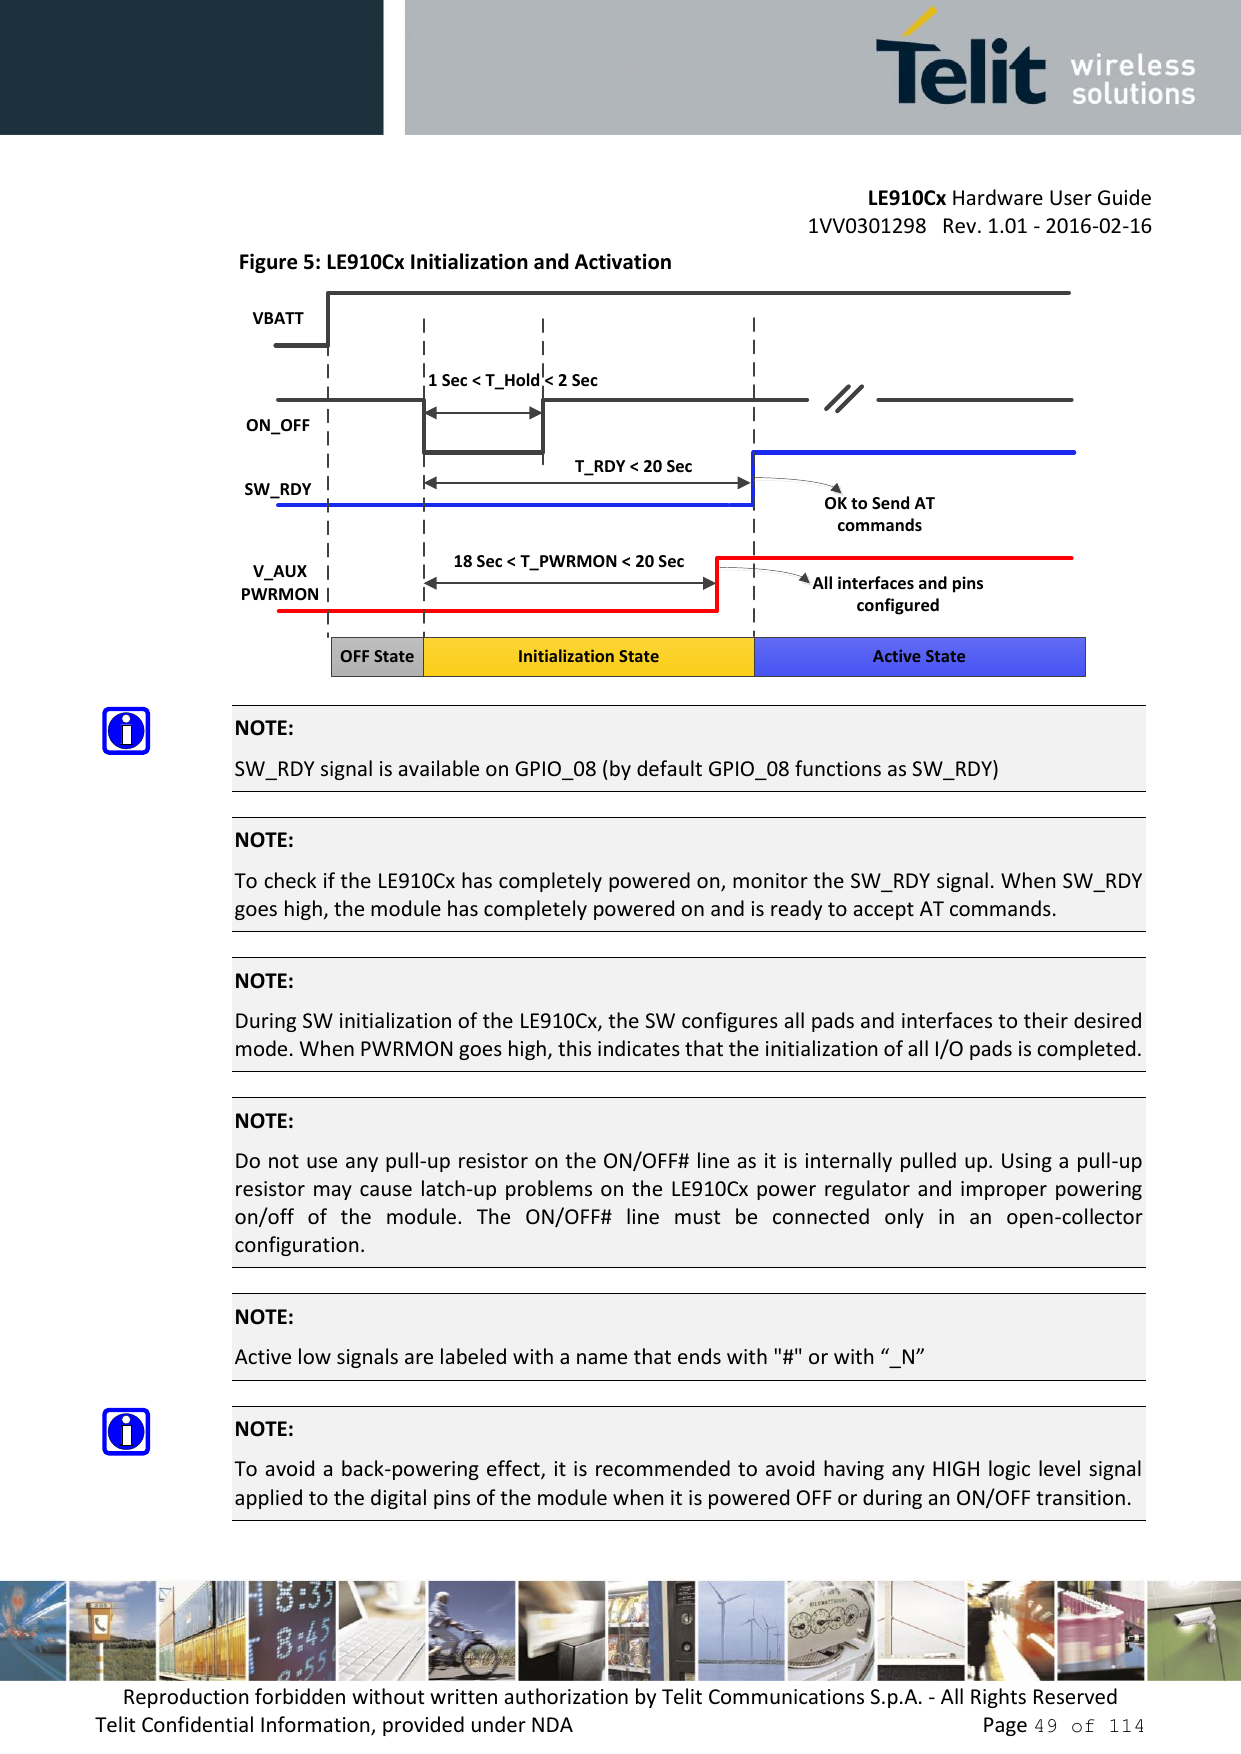         LE910Cx Hardware User Guide     1VV0301298   Rev. 1.01 - 2016-02-16 Reproduction forbidden without written authorization by Telit Communications S.p.A. - All Rights Reserved Telit Confidential Information, provided under NDA                 Page 49 of 114 Figure 5: LE910Cx Initialization and Activation   NOTE: SW_RDY signal is available on GPIO_08 (by default GPIO_08 functions as SW_RDY)   NOTE: To check if the LE910Cx has completely powered on, monitor the SW_RDY signal. When SW_RDY goes high, the module has completely powered on and is ready to accept AT commands.  NOTE:  During SW initialization of the LE910Cx, the SW configures all pads and interfaces to their desired mode. When PWRMON goes high, this indicates that the initialization of all I/O pads is completed.  NOTE:  Do not use any pull-up resistor on the ON/OFF# line as it is internally pulled up. Using a pull-up resistor may cause  latch-up problems on the LE910Cx power regulator and improper  powering on/off  of  the  module.  The  ON/OFF#  line  must  be  connected  only  in  an  open-collector configuration.  NOTE:  Active low signals are labeled with a name that ends with &quot;#&quot; or with “_N”  NOTE: To avoid a back-powering effect, it is recommended to avoid having any HIGH logic level signal applied to the digital pins of the module when it is powered OFF or during an ON/OFF transition.    1 Sec &lt; T_Hold &lt; 2 SecVBATTON_OFFSW_RDYT_RDY &lt; 20 SecV_AUXPWRMON18 Sec &lt; T_PWRMON &lt; 20 SecOFF State Initialization State Active StateOK to Send AT commandsAll interfaces and pins configured 